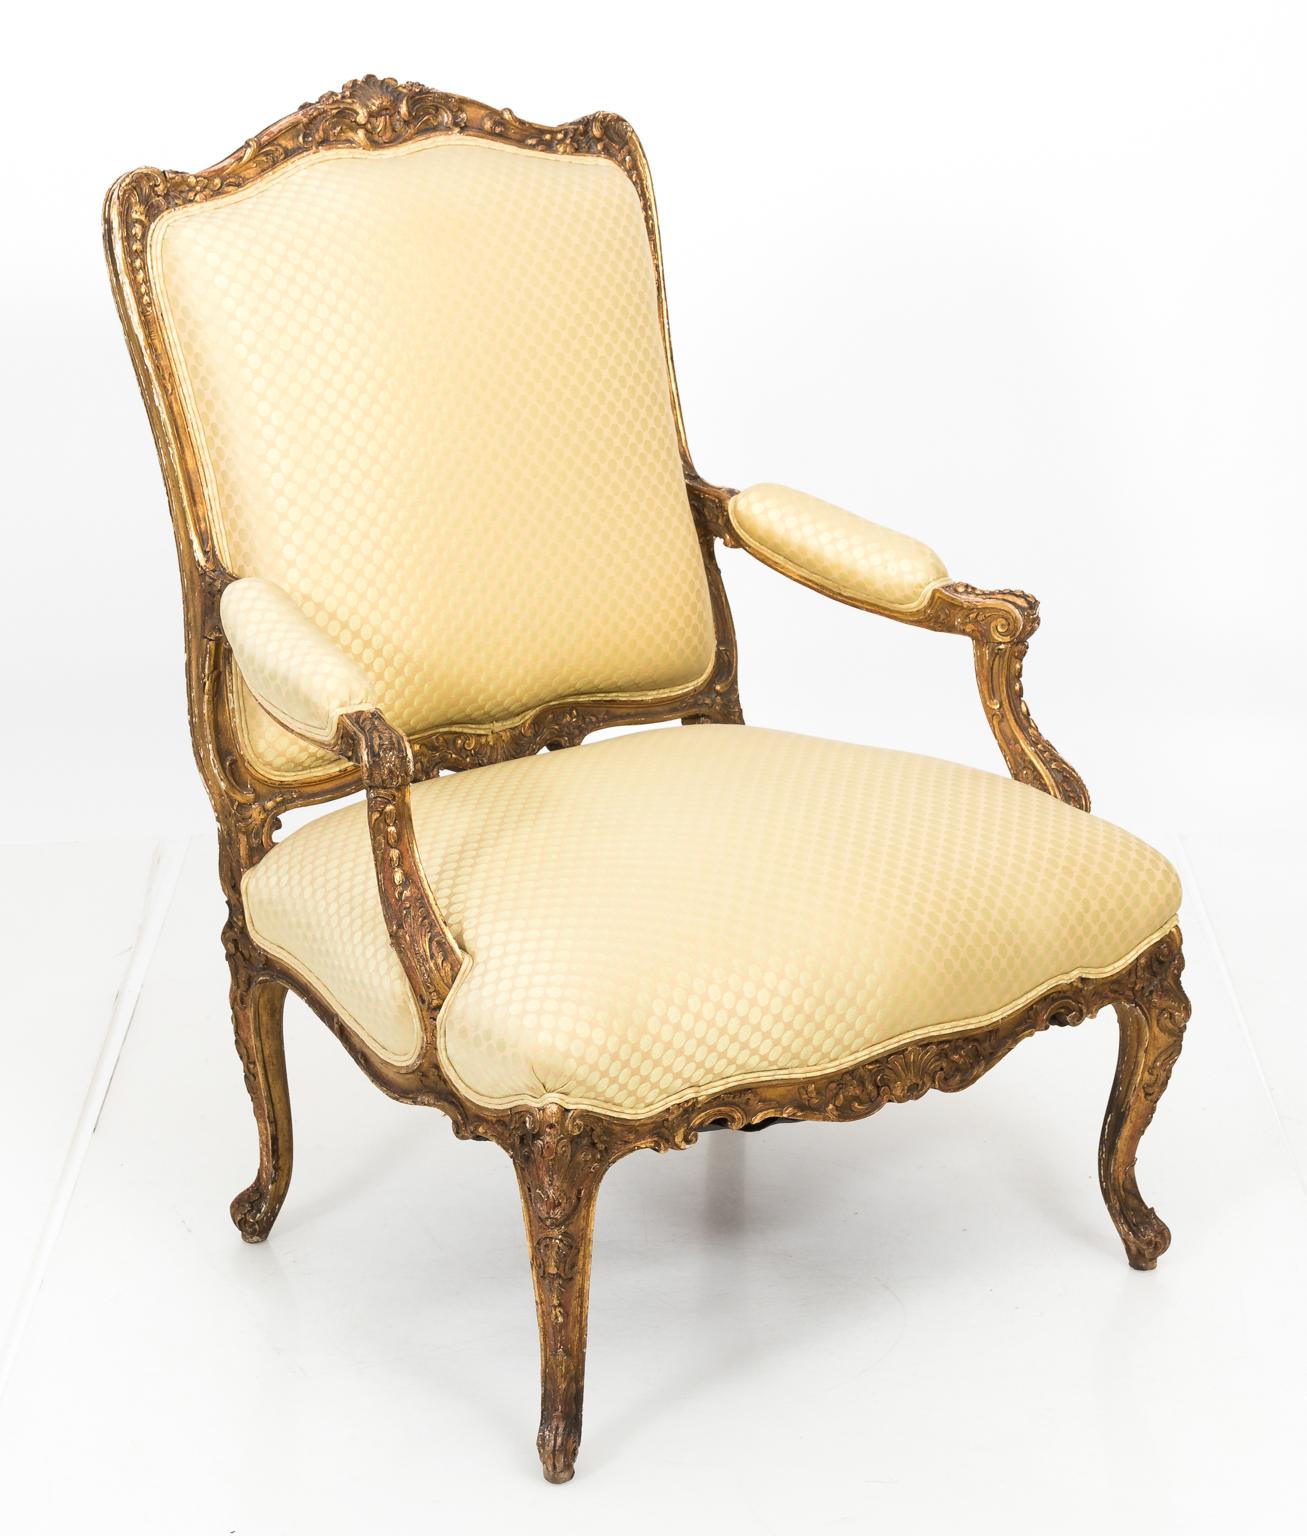 19th Century Giltwood Chaise Lounge Chair For Sale 12